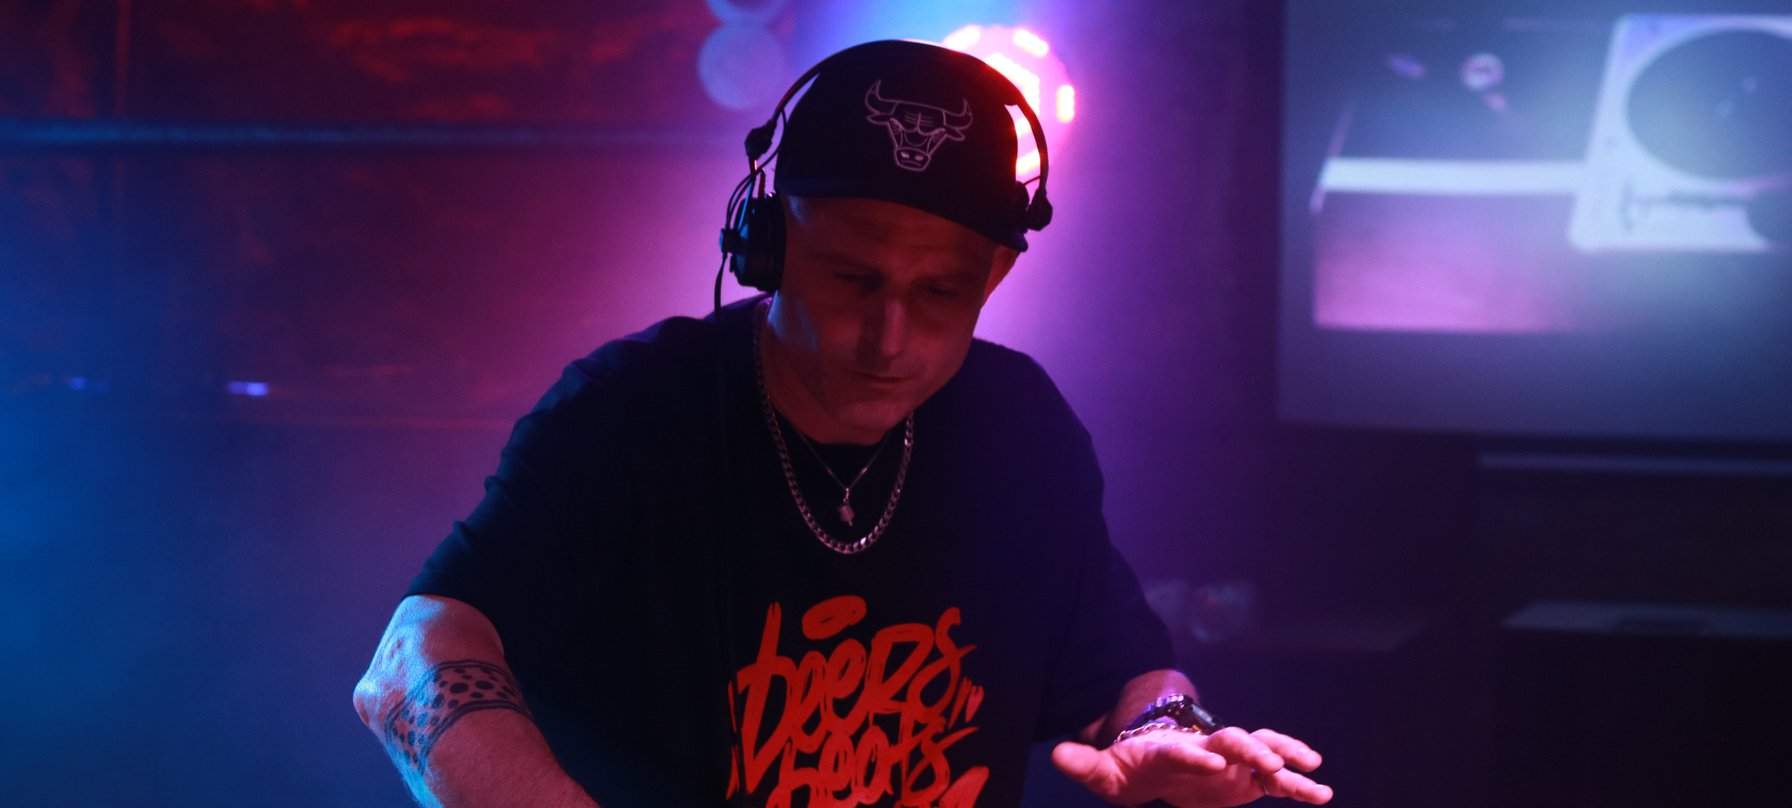 A photo of DJ Thensum leading over a DJ deck in a dark space with red and blue lights in the background. DJ Thensum has pale skin and is wearing a black cap cap and black and red tshirt. Credit Kishka Jensen.